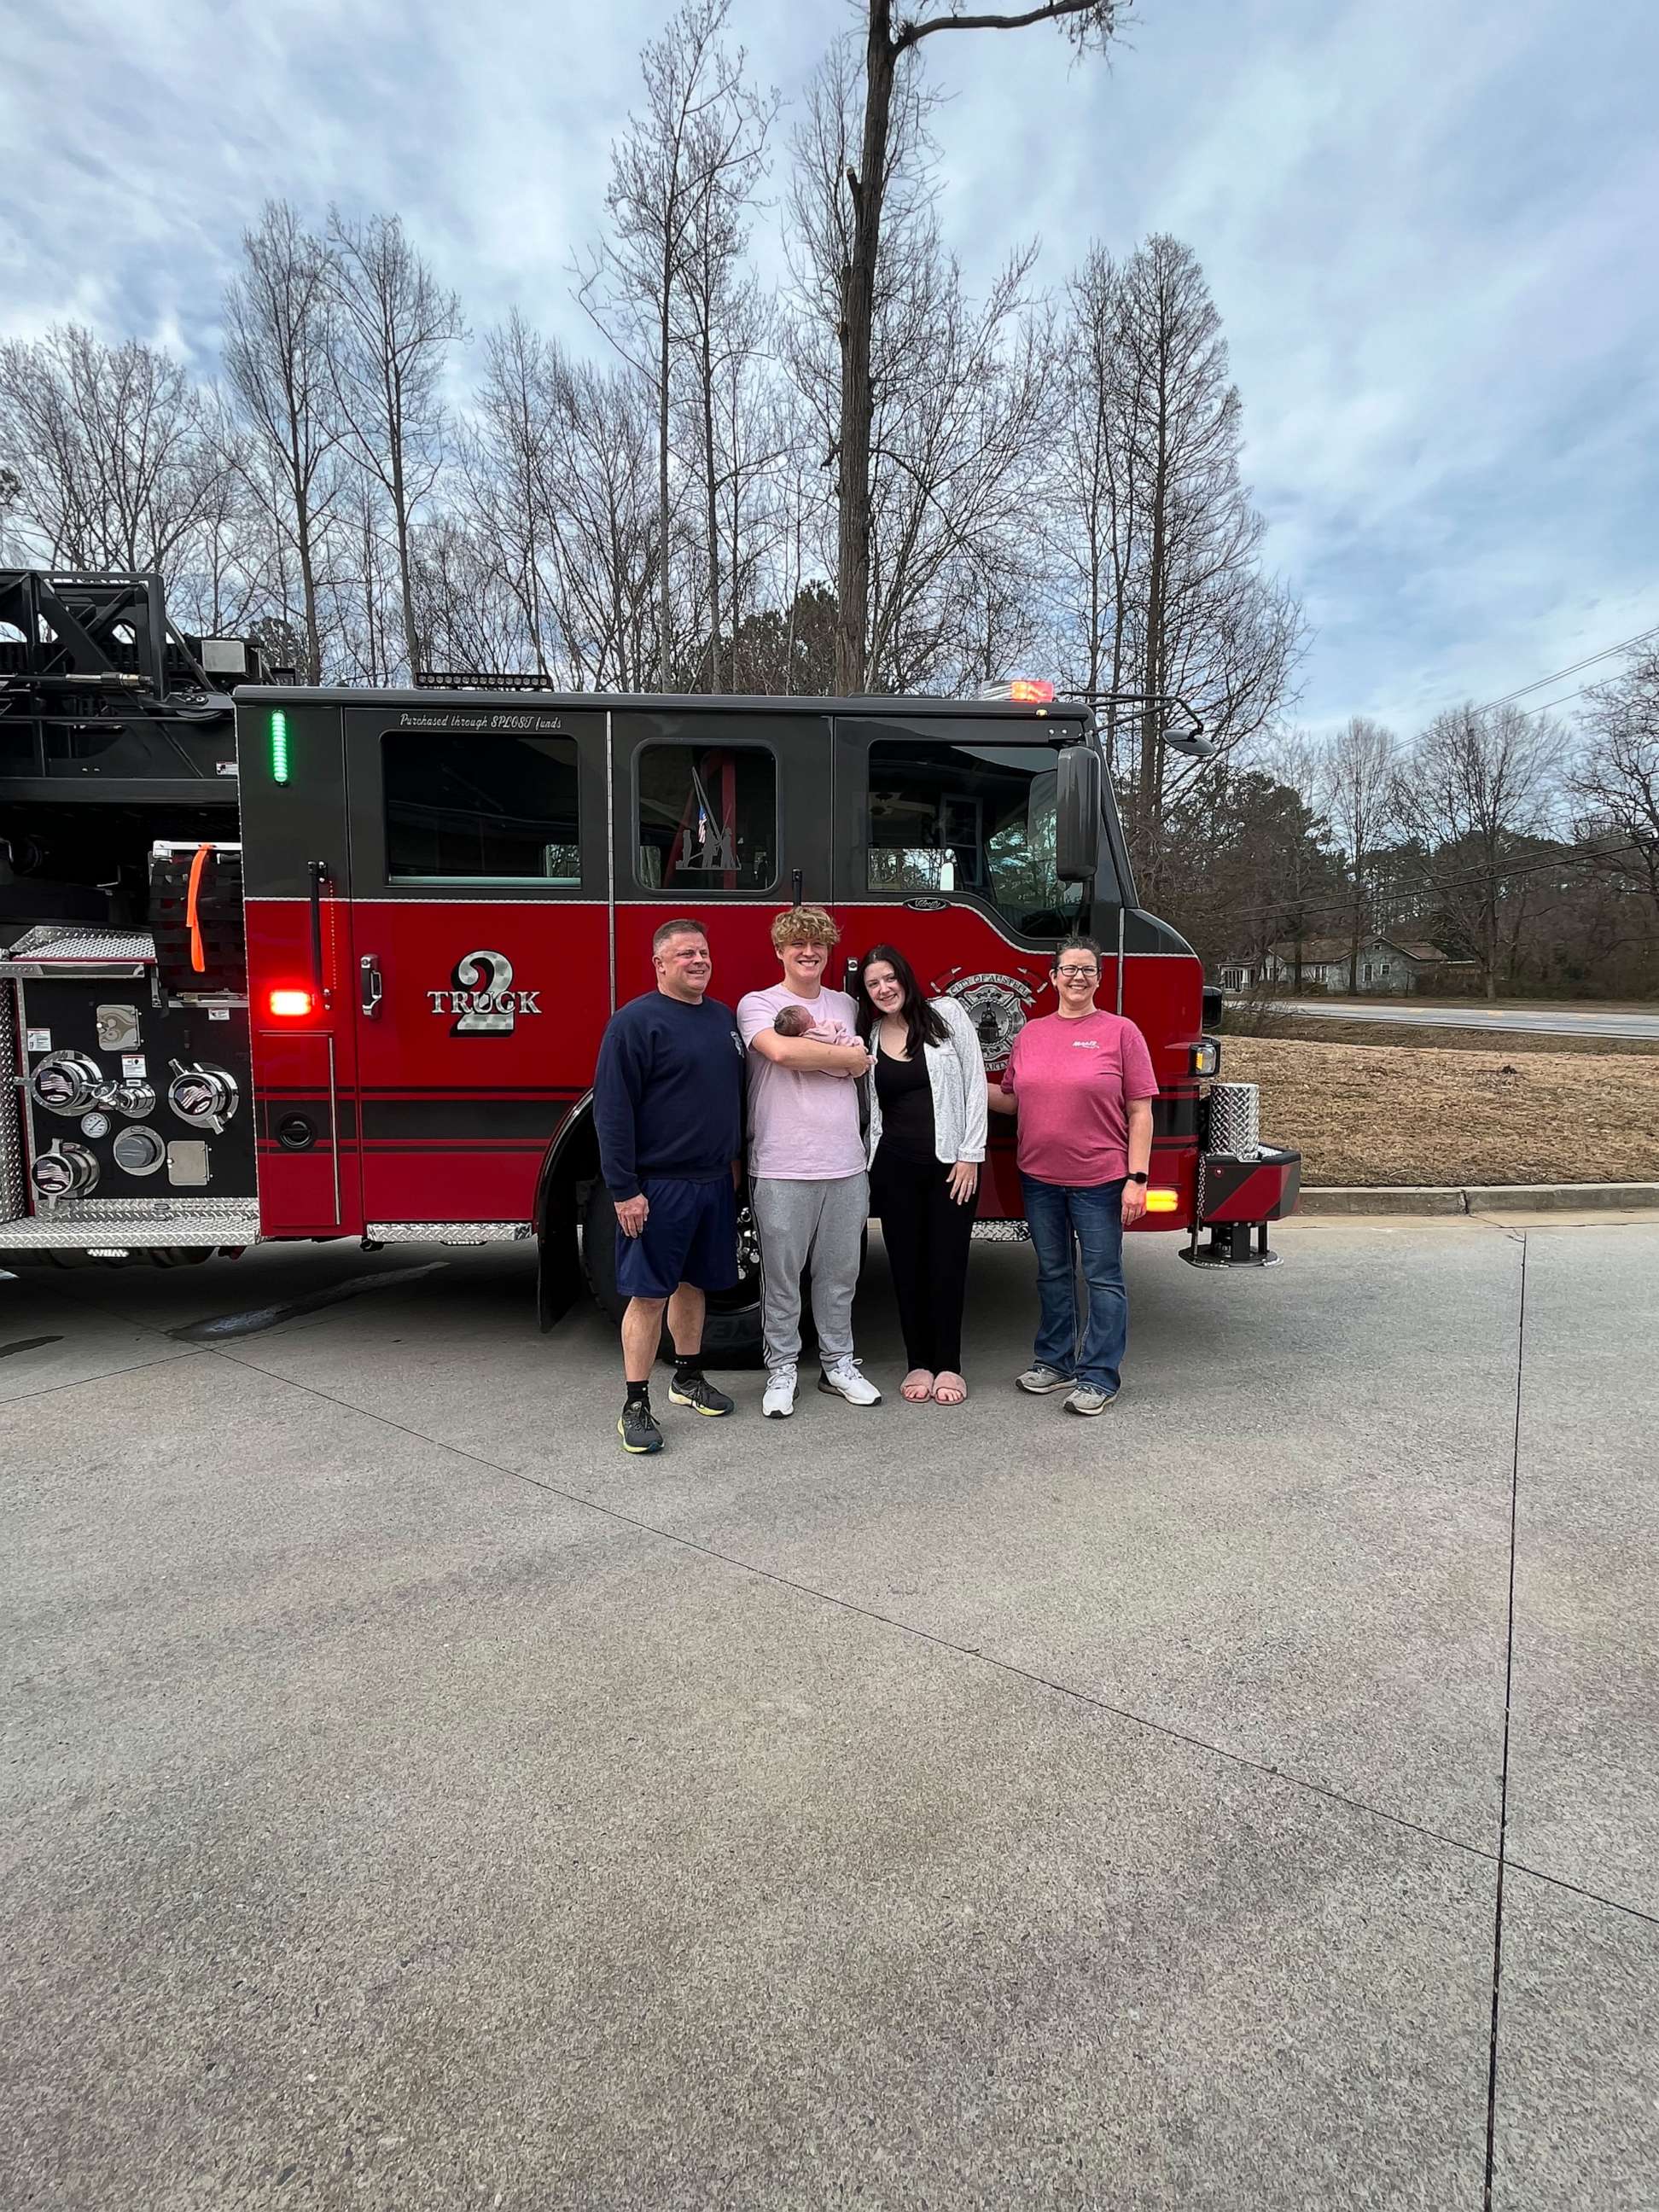 PHOTO: In February, firefighter Bret Langston helped deliver his granddaughter Adalynn at his firehouse, Austell Fire Station No. 2 in Austell, Georgia.